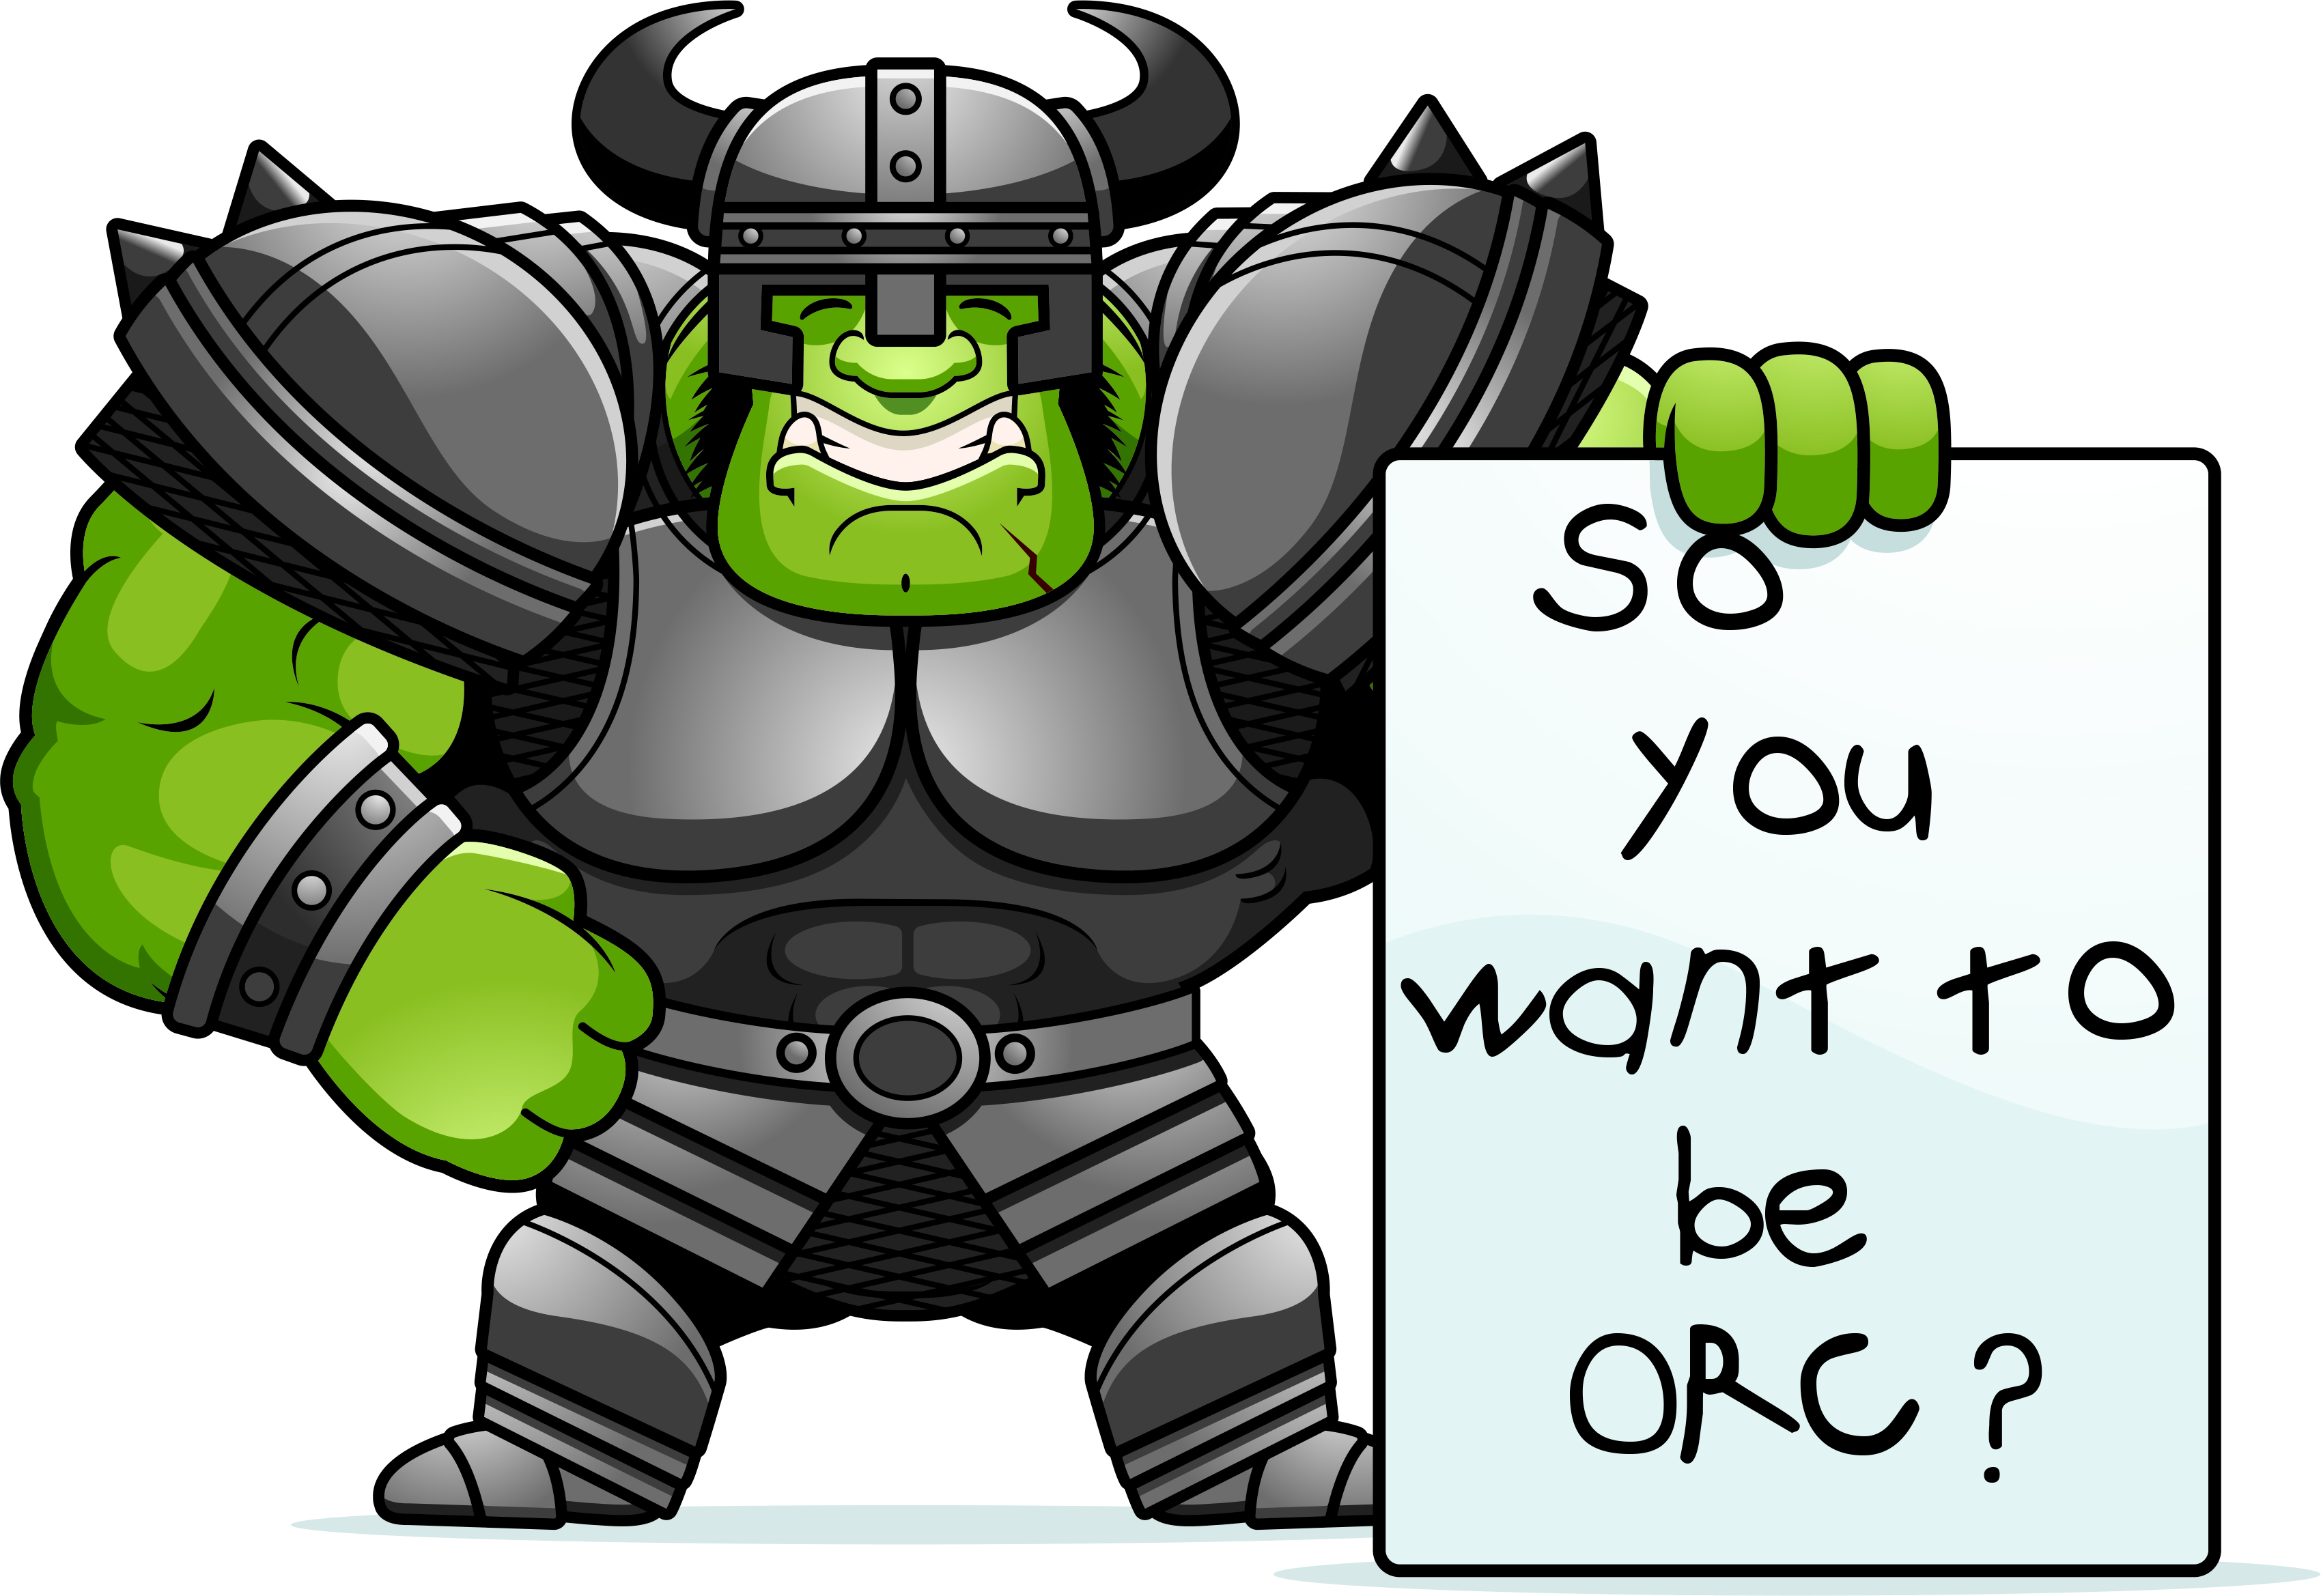 The Or Project, so you want to be an orc